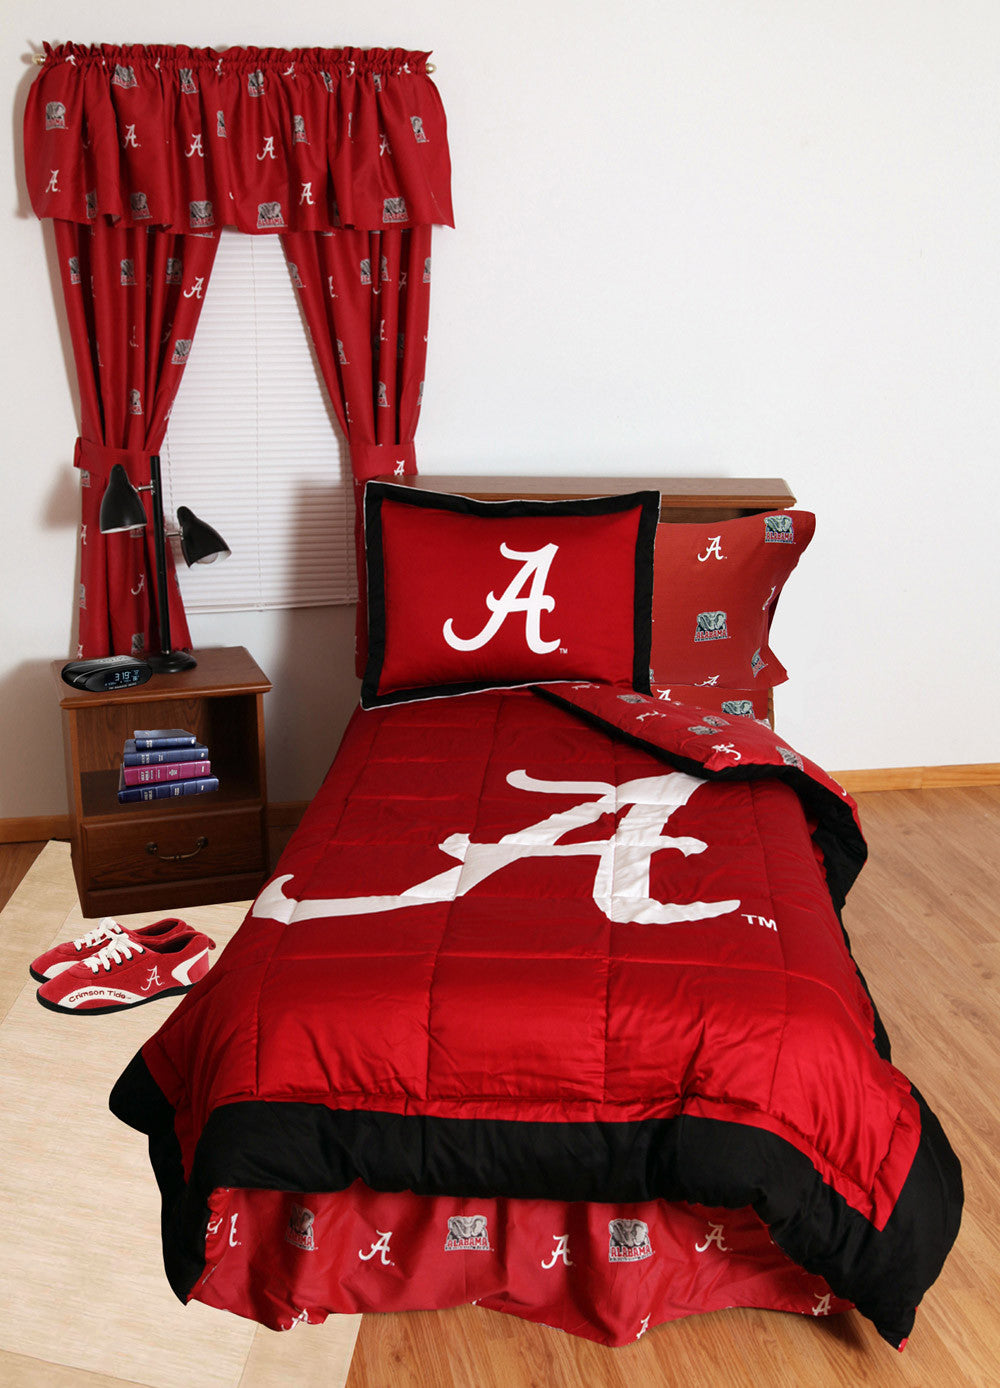 Alabama Bed In A Bag Full - With Team Colored Sheets - Alabbfl By College Covers